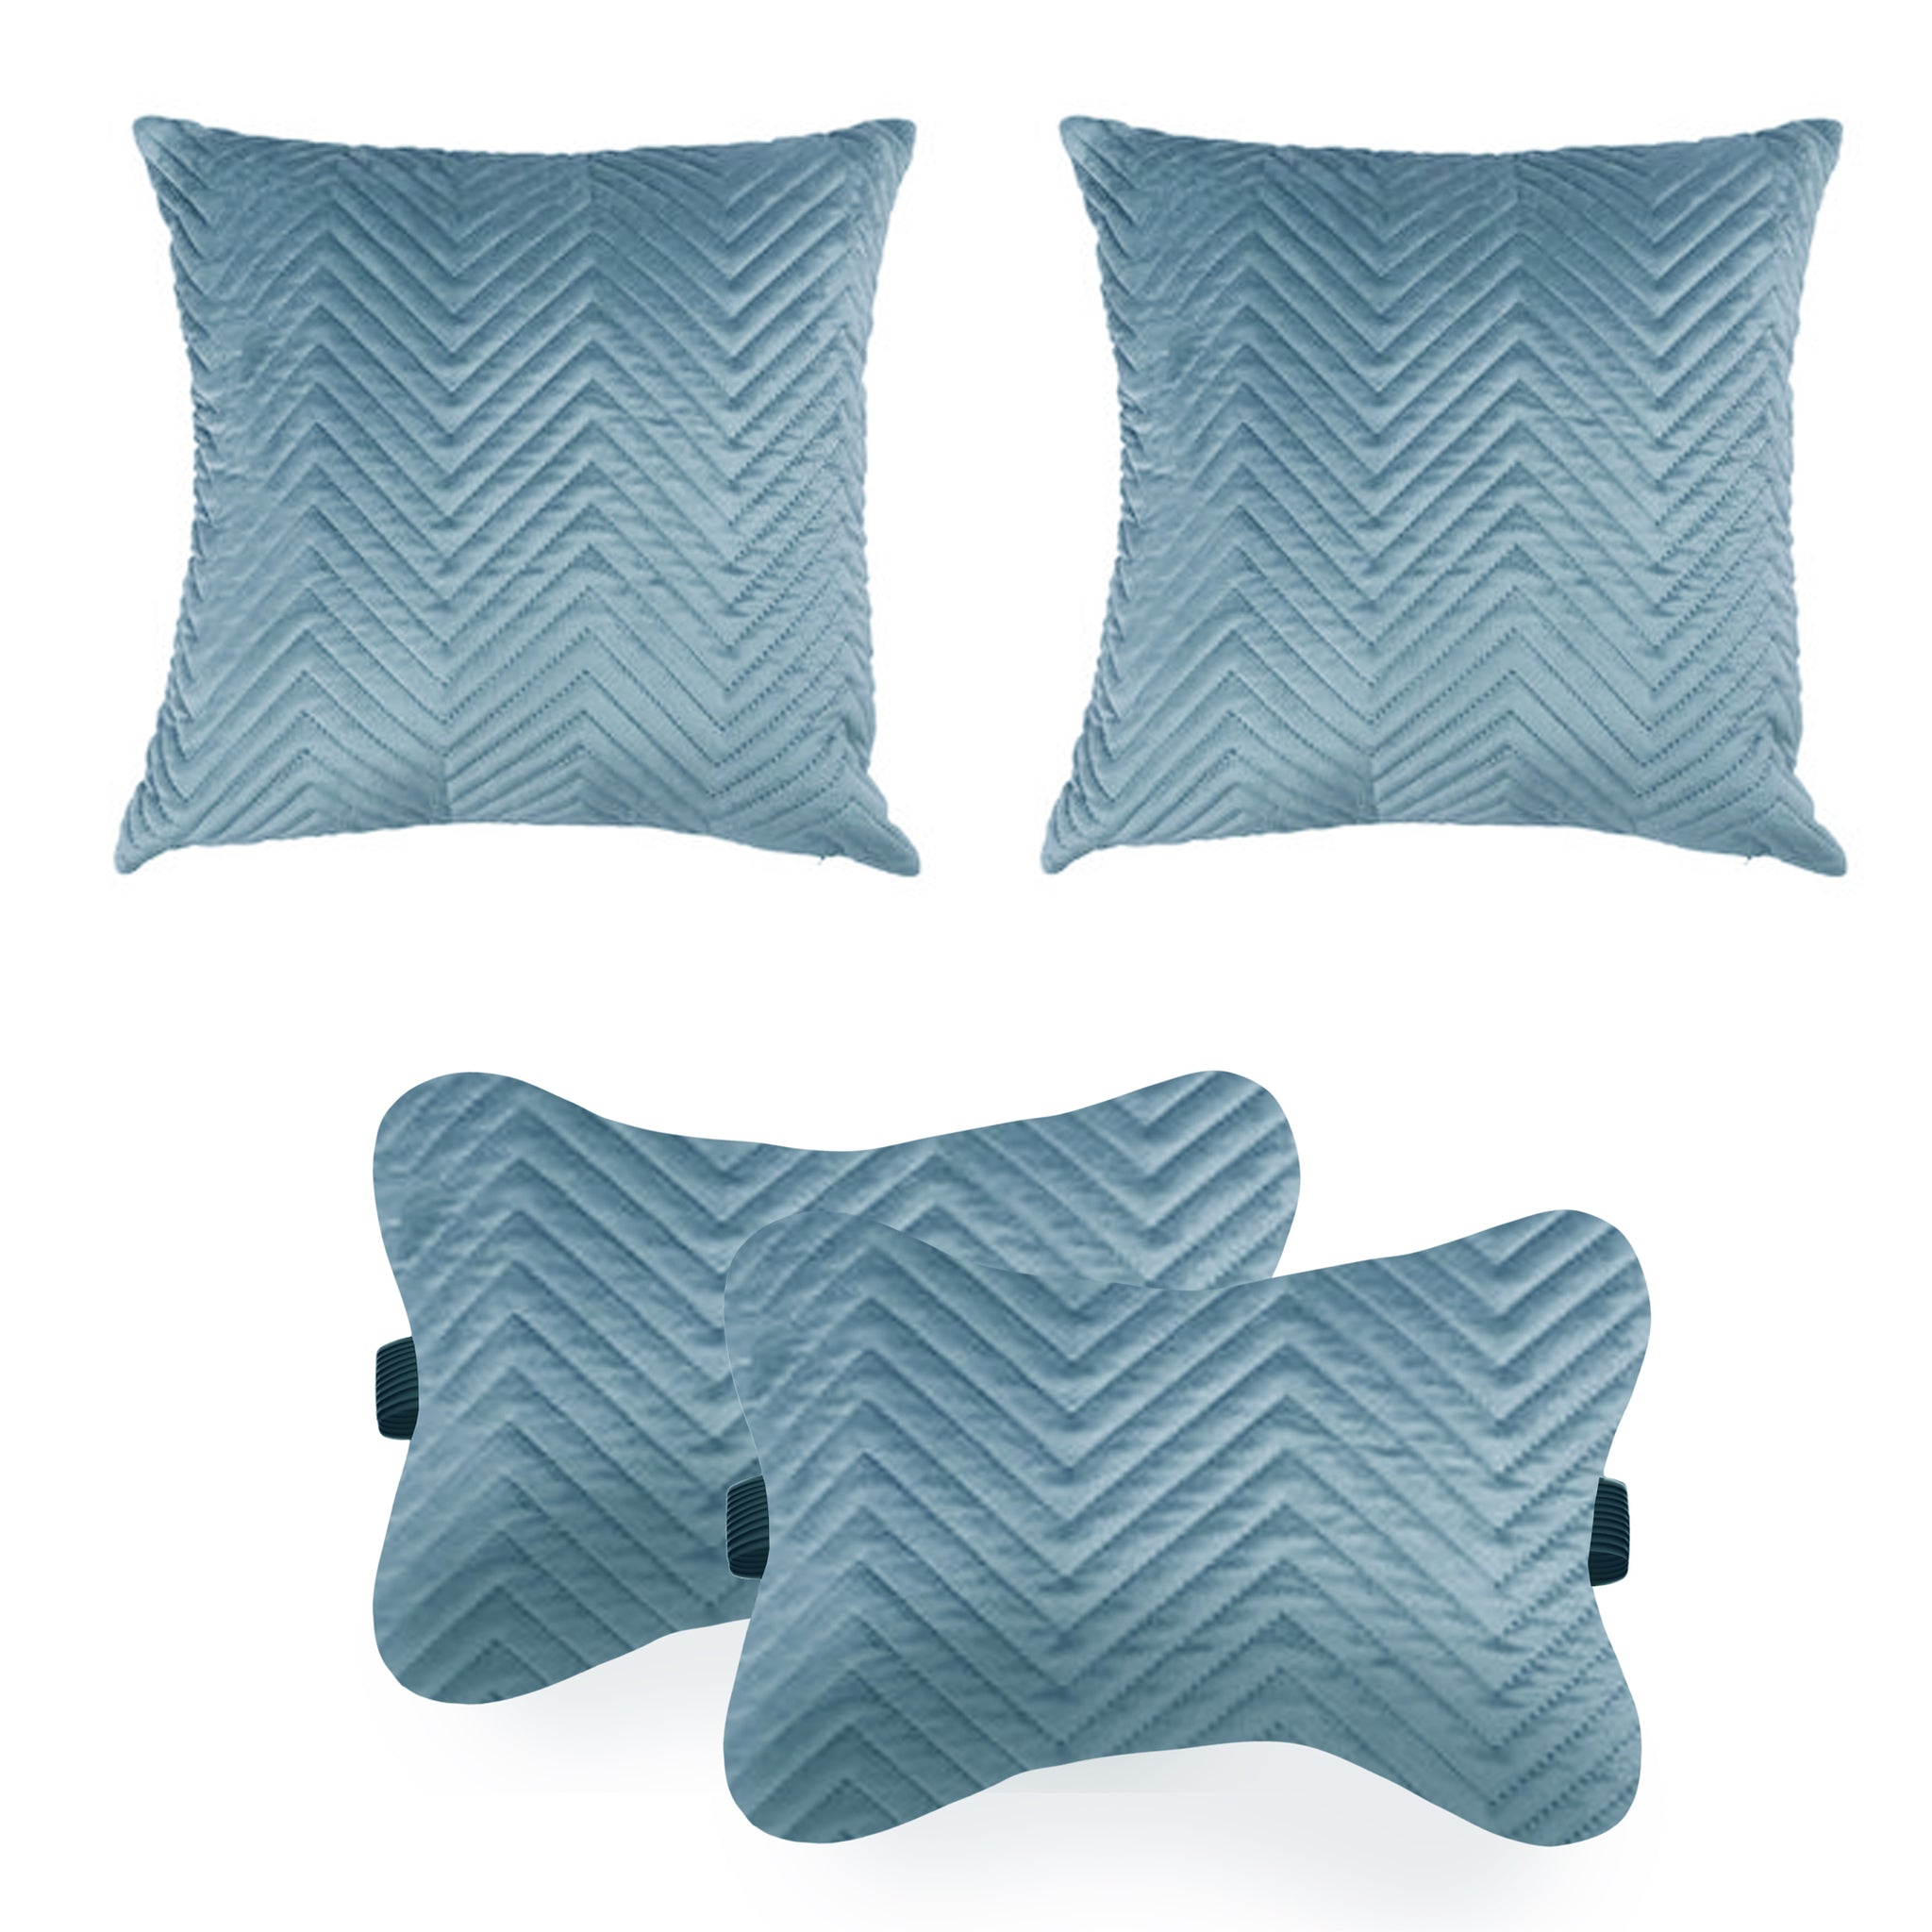 Car Cushion Pillows for Neck, Back and Seat Rest, Pack of 4, Quilted Blue Velvet Material, 2 PCs of Bone Neck Rest Size: 6x10 Inches, 2 Pcs of Car Cushion Size: 12x12 Inches by Lushomes